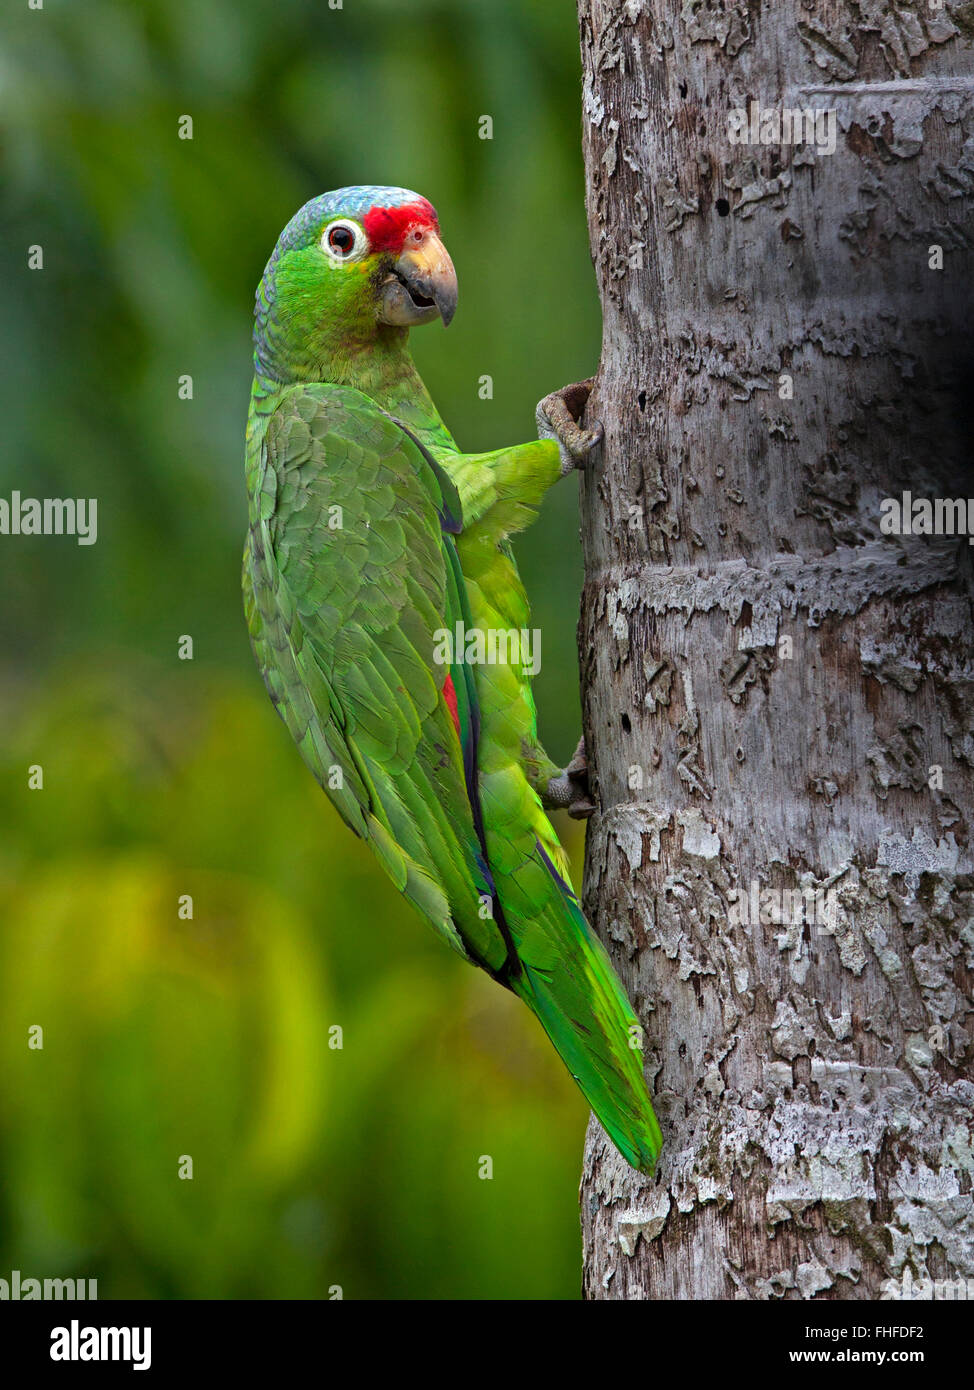 Red-lored parrot on tree Stock Photo